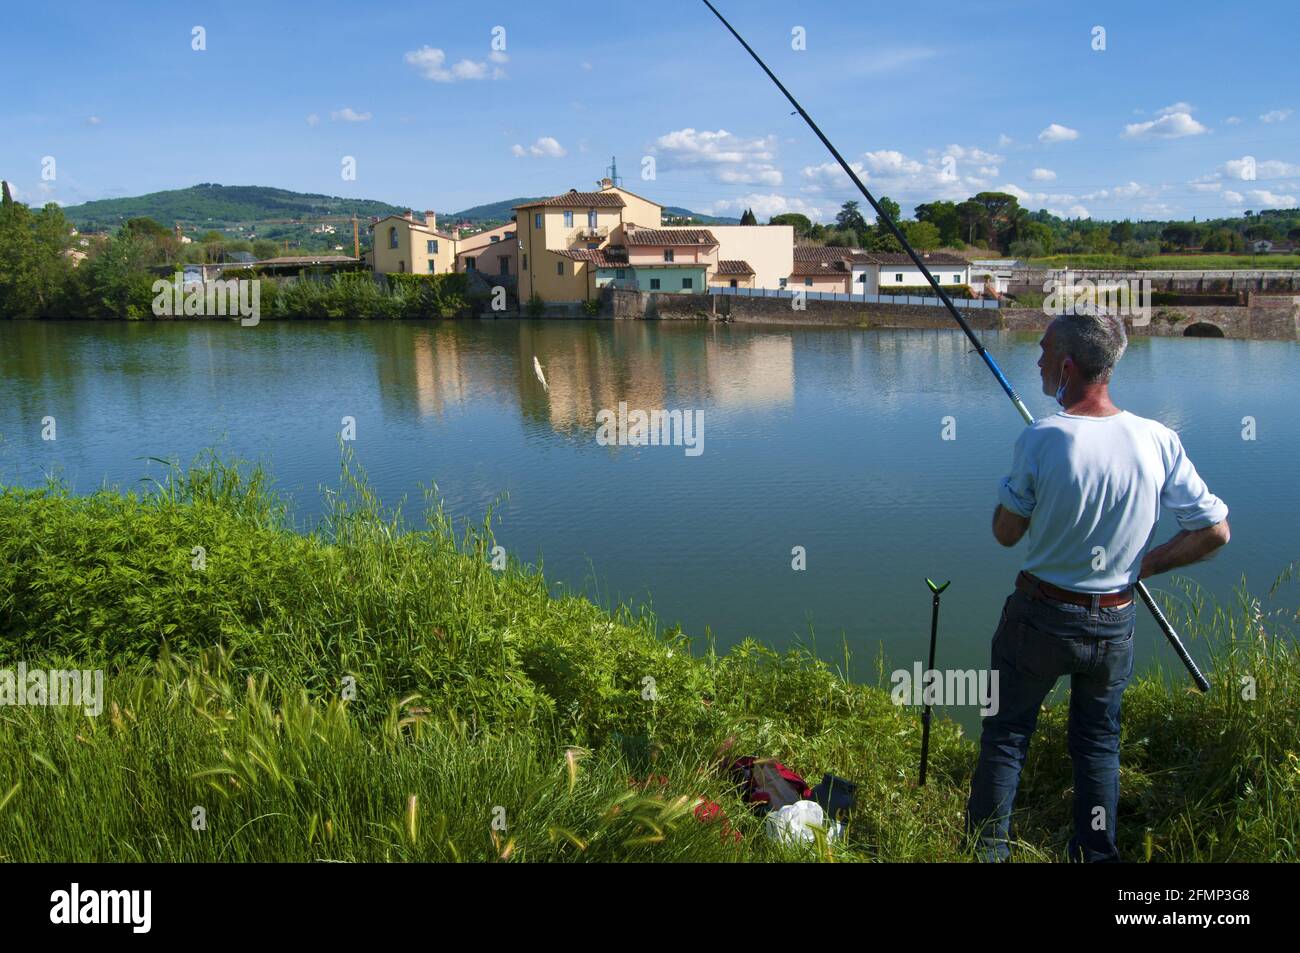 Florence, Italy - Fisherman on the bank of the Arno river, when he catches a small fish on the hook. Stock Photo